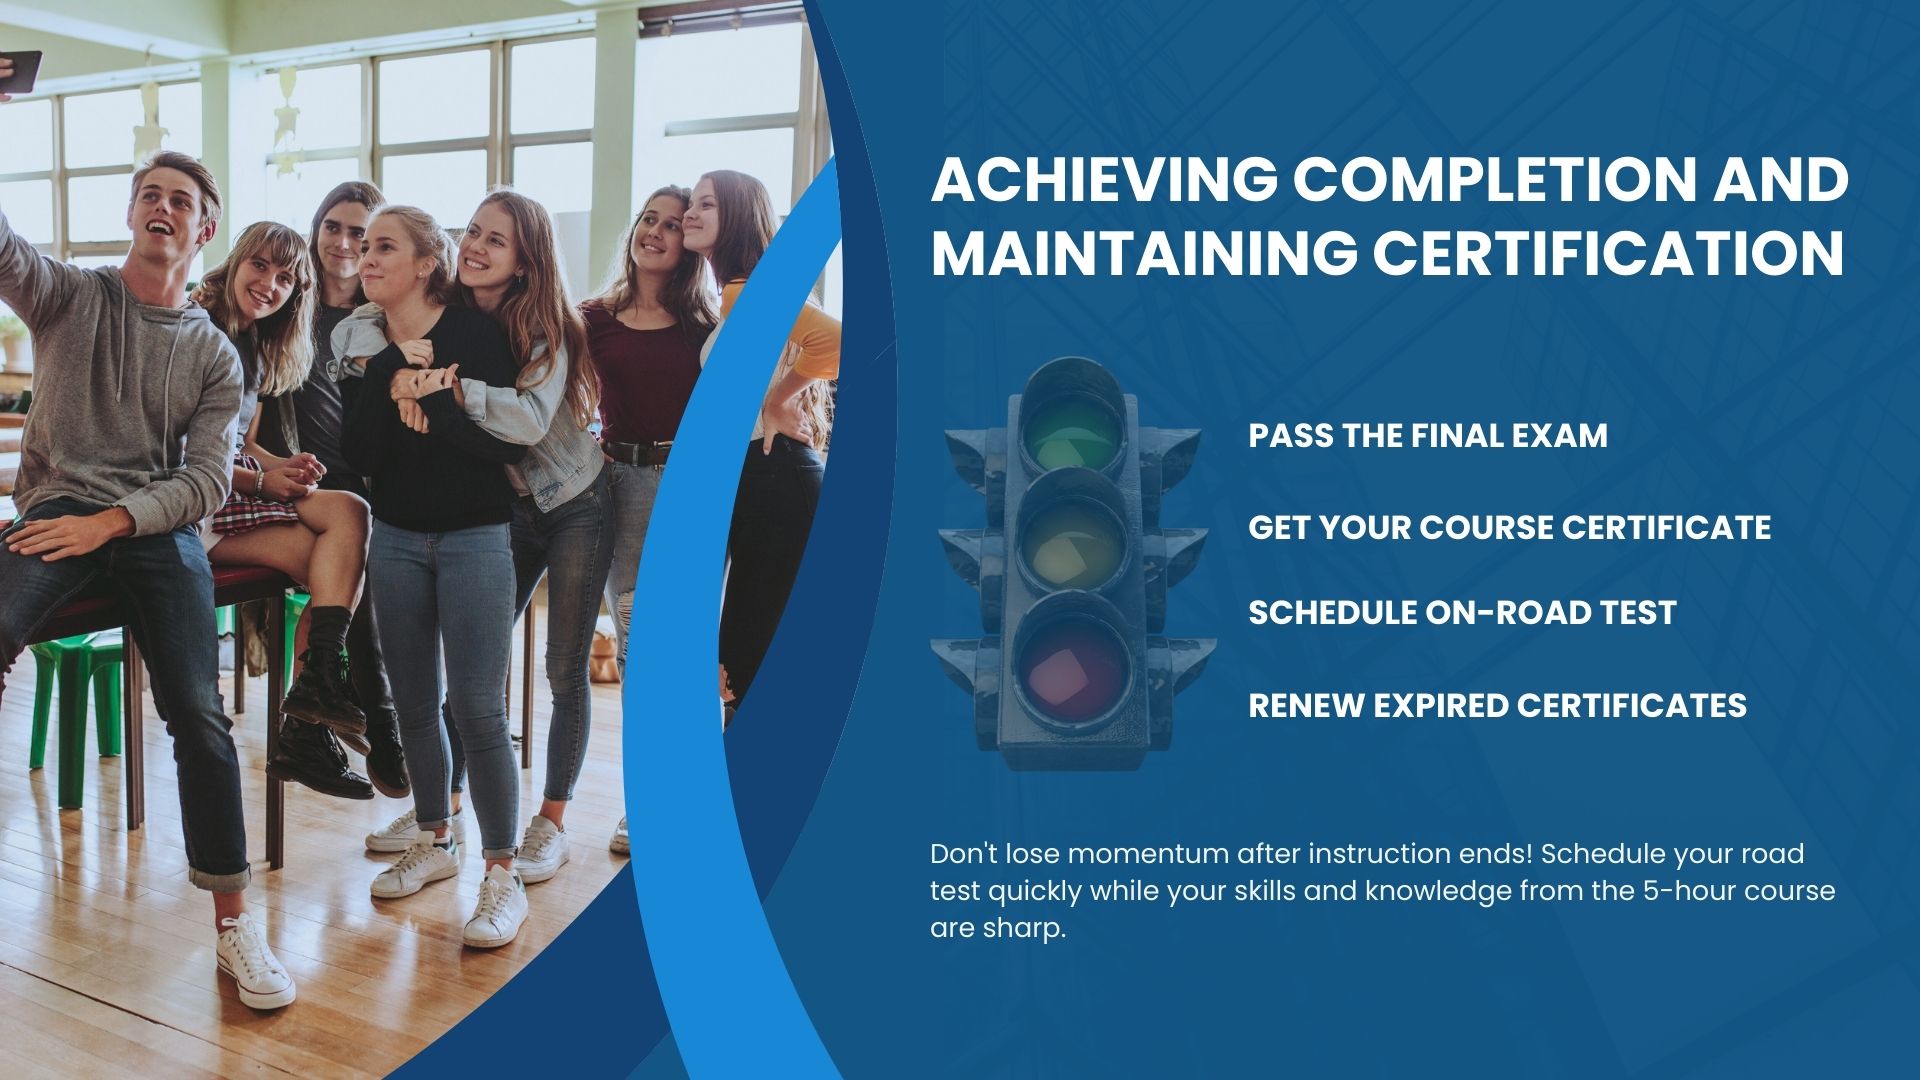 Achieving Completion and Maintaining Certification